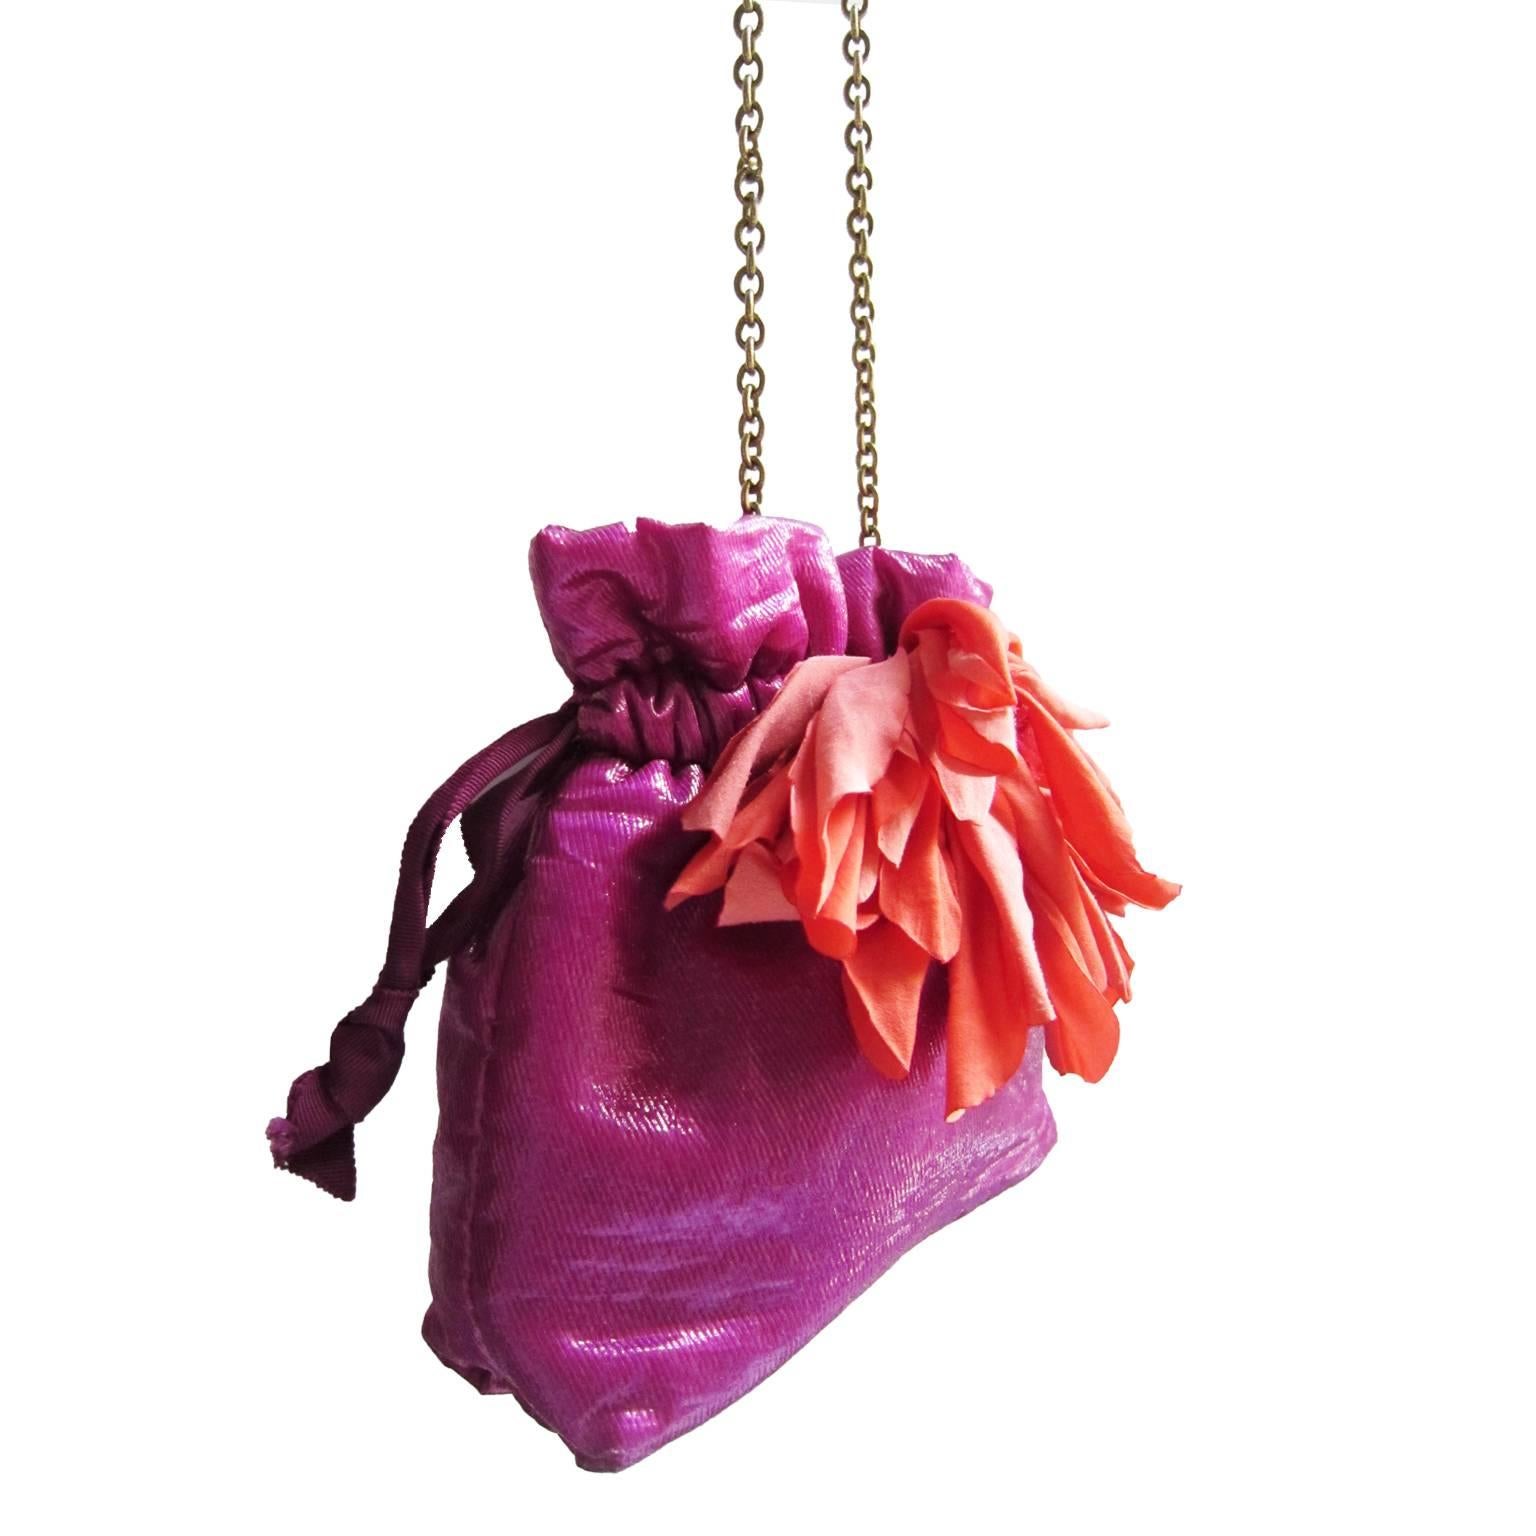 An eye-catching fuchsia palette Lanvin pouch with oversized bright orange flower detail. 
Could be used a clutch or over the shoulder with gold tone metal chain.
One interior pocket.
Made in Italy.
Measurements: : 
15 cm x 18.5 cm x 5 cm

